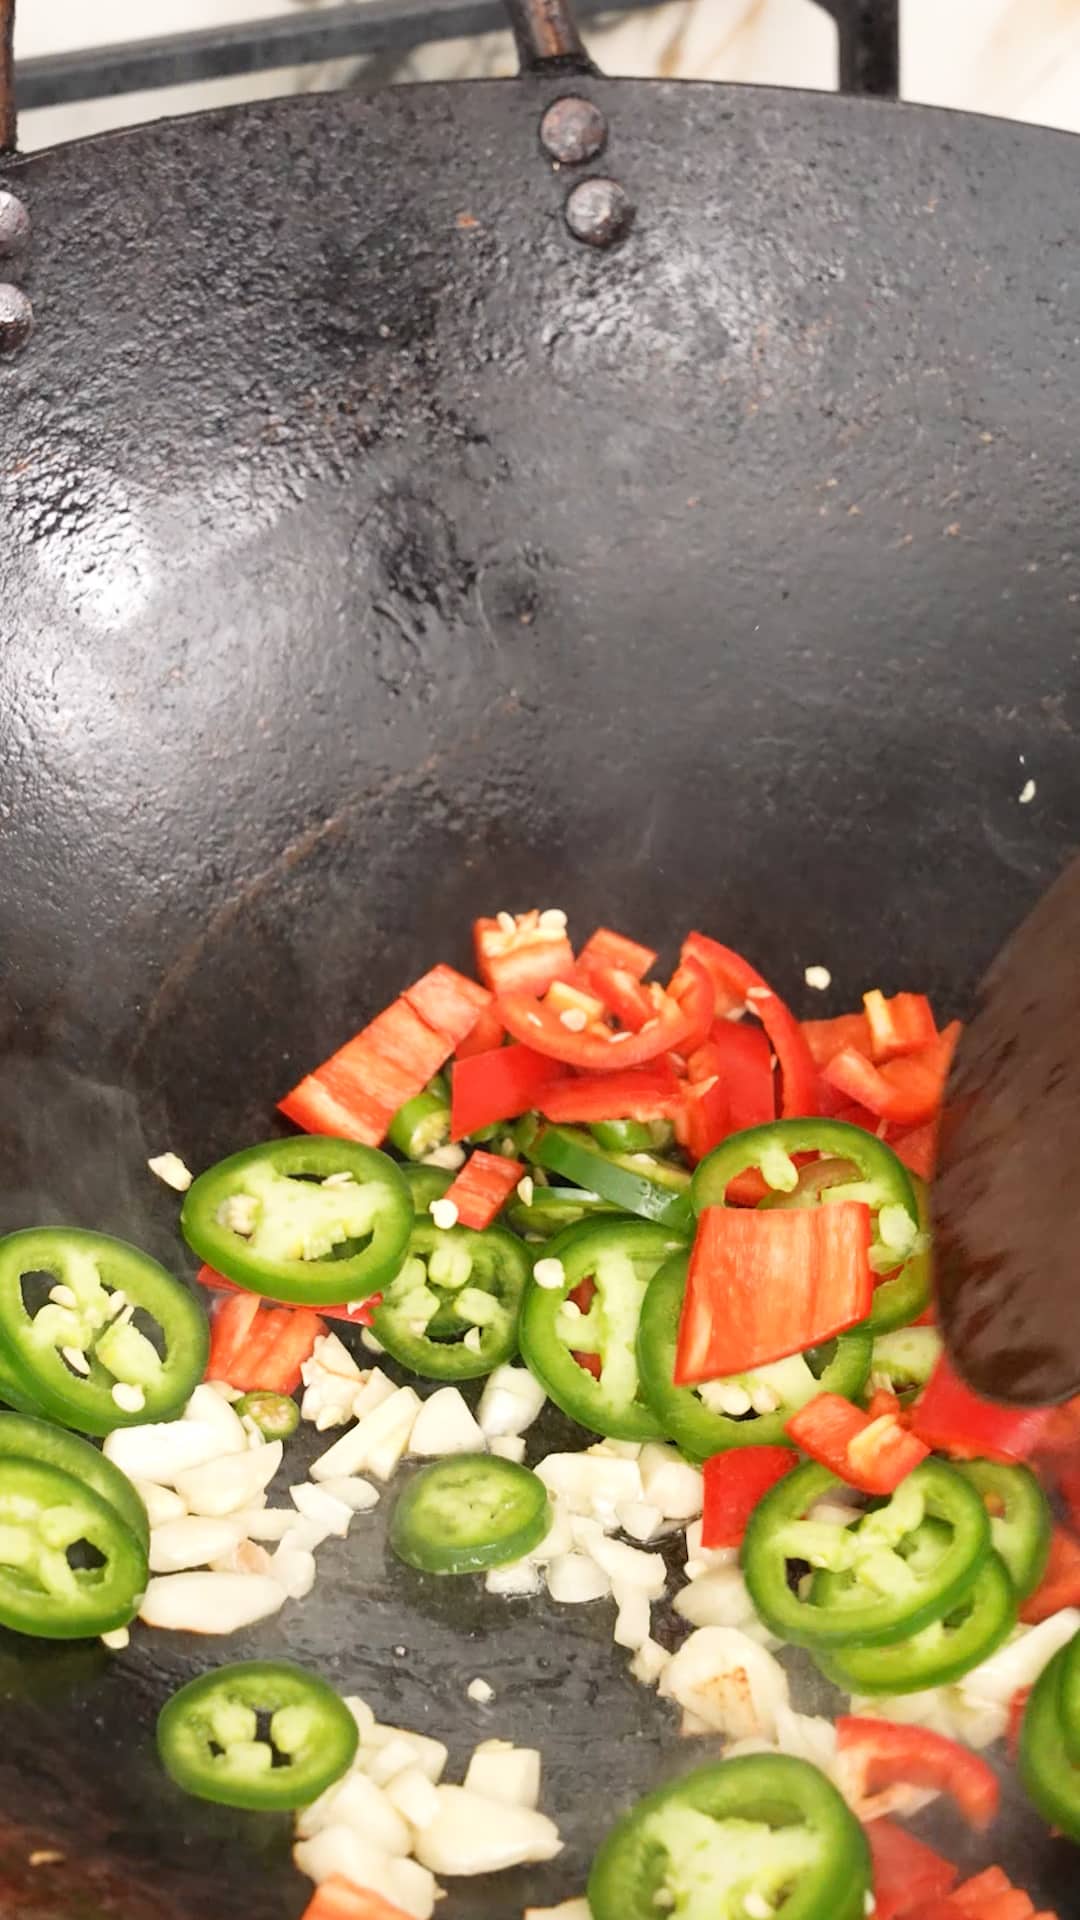 Aromatics being cooked in a wok.